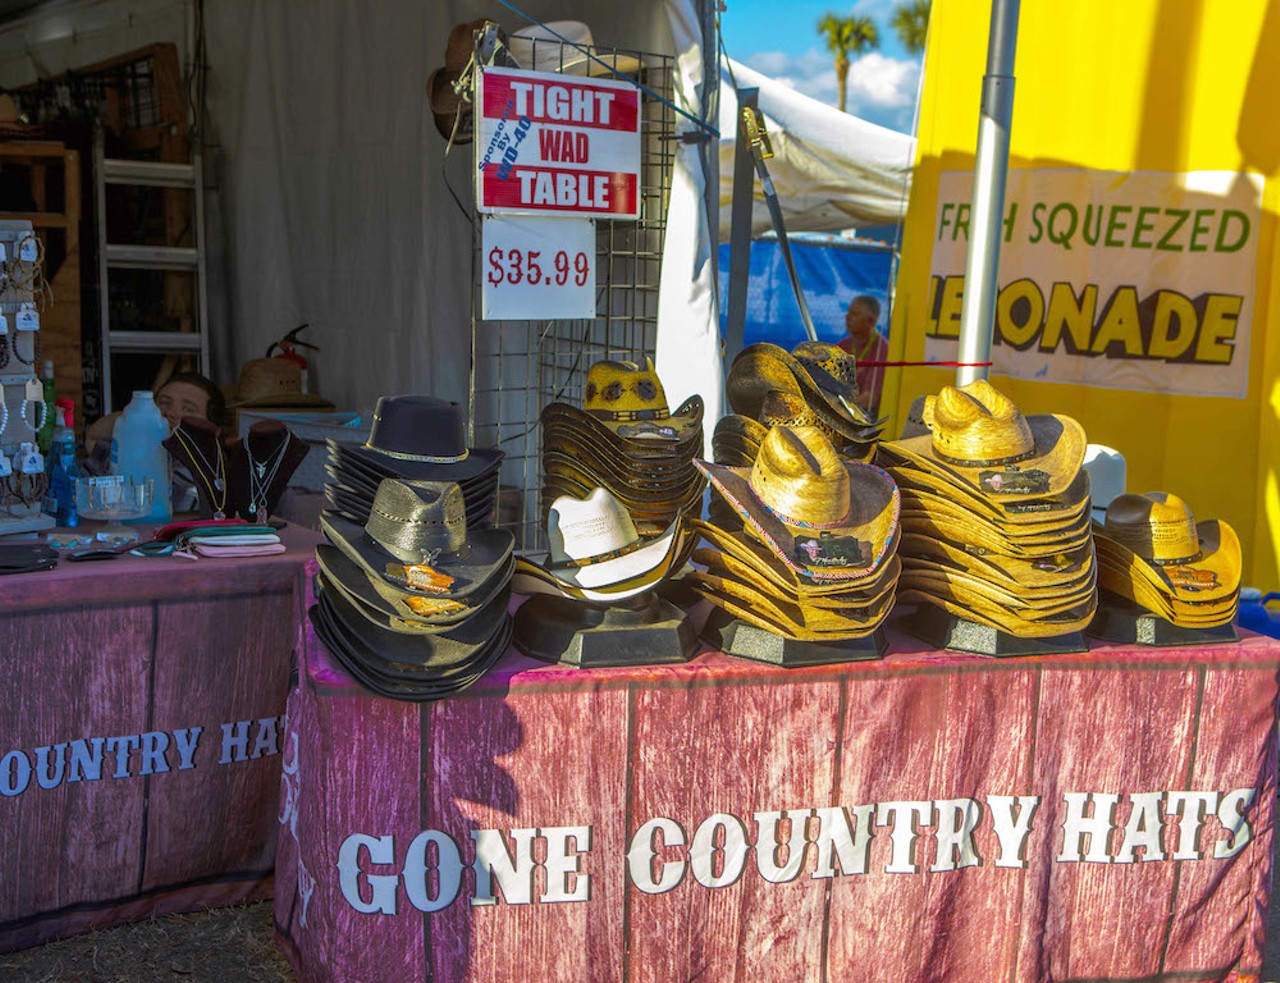 Everything we saw at Florida State Fair's opening weekend